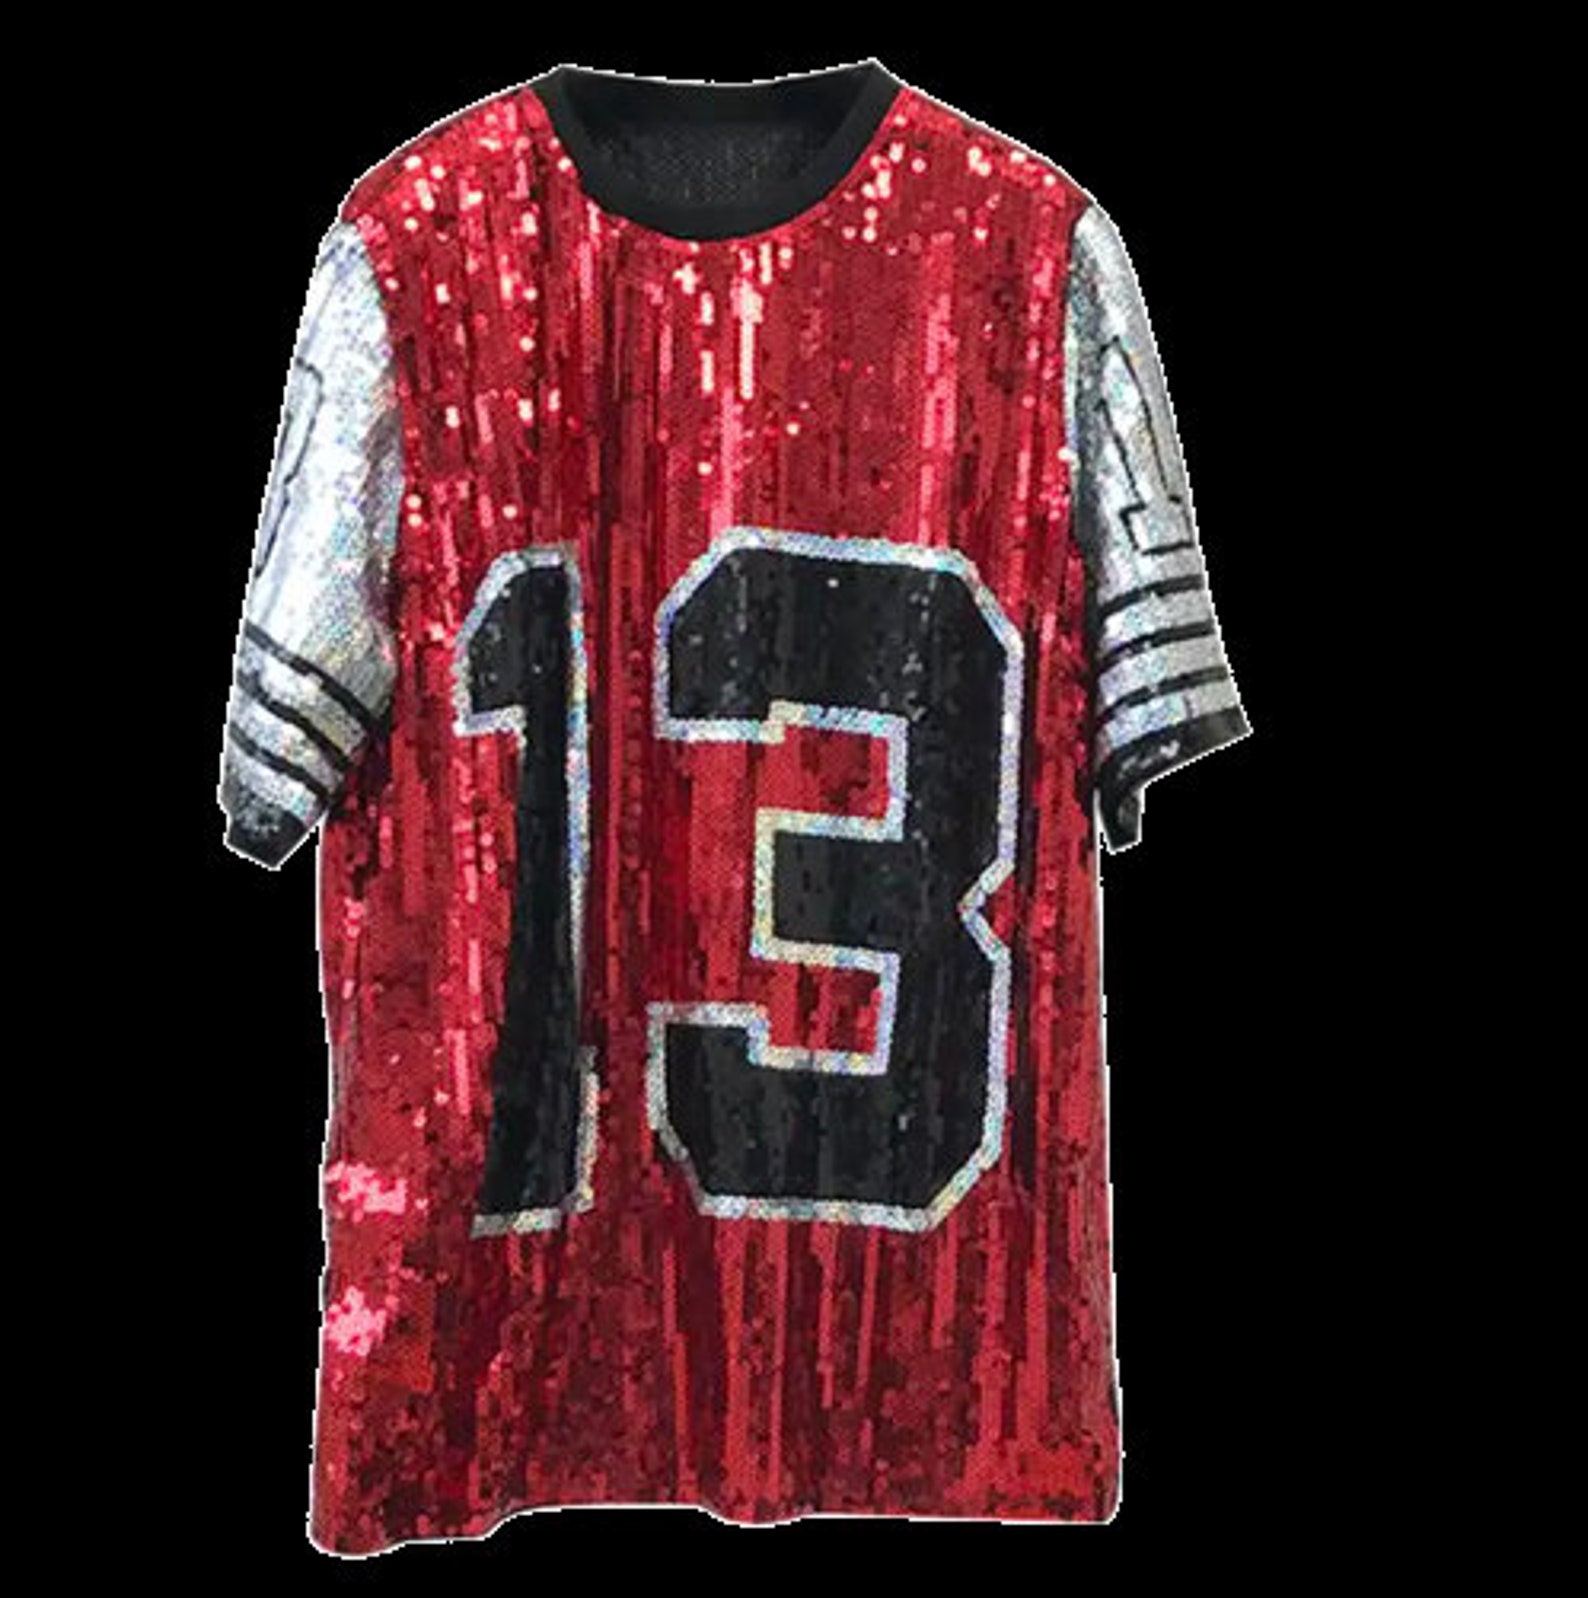 13 Sequin Jersey Etsy